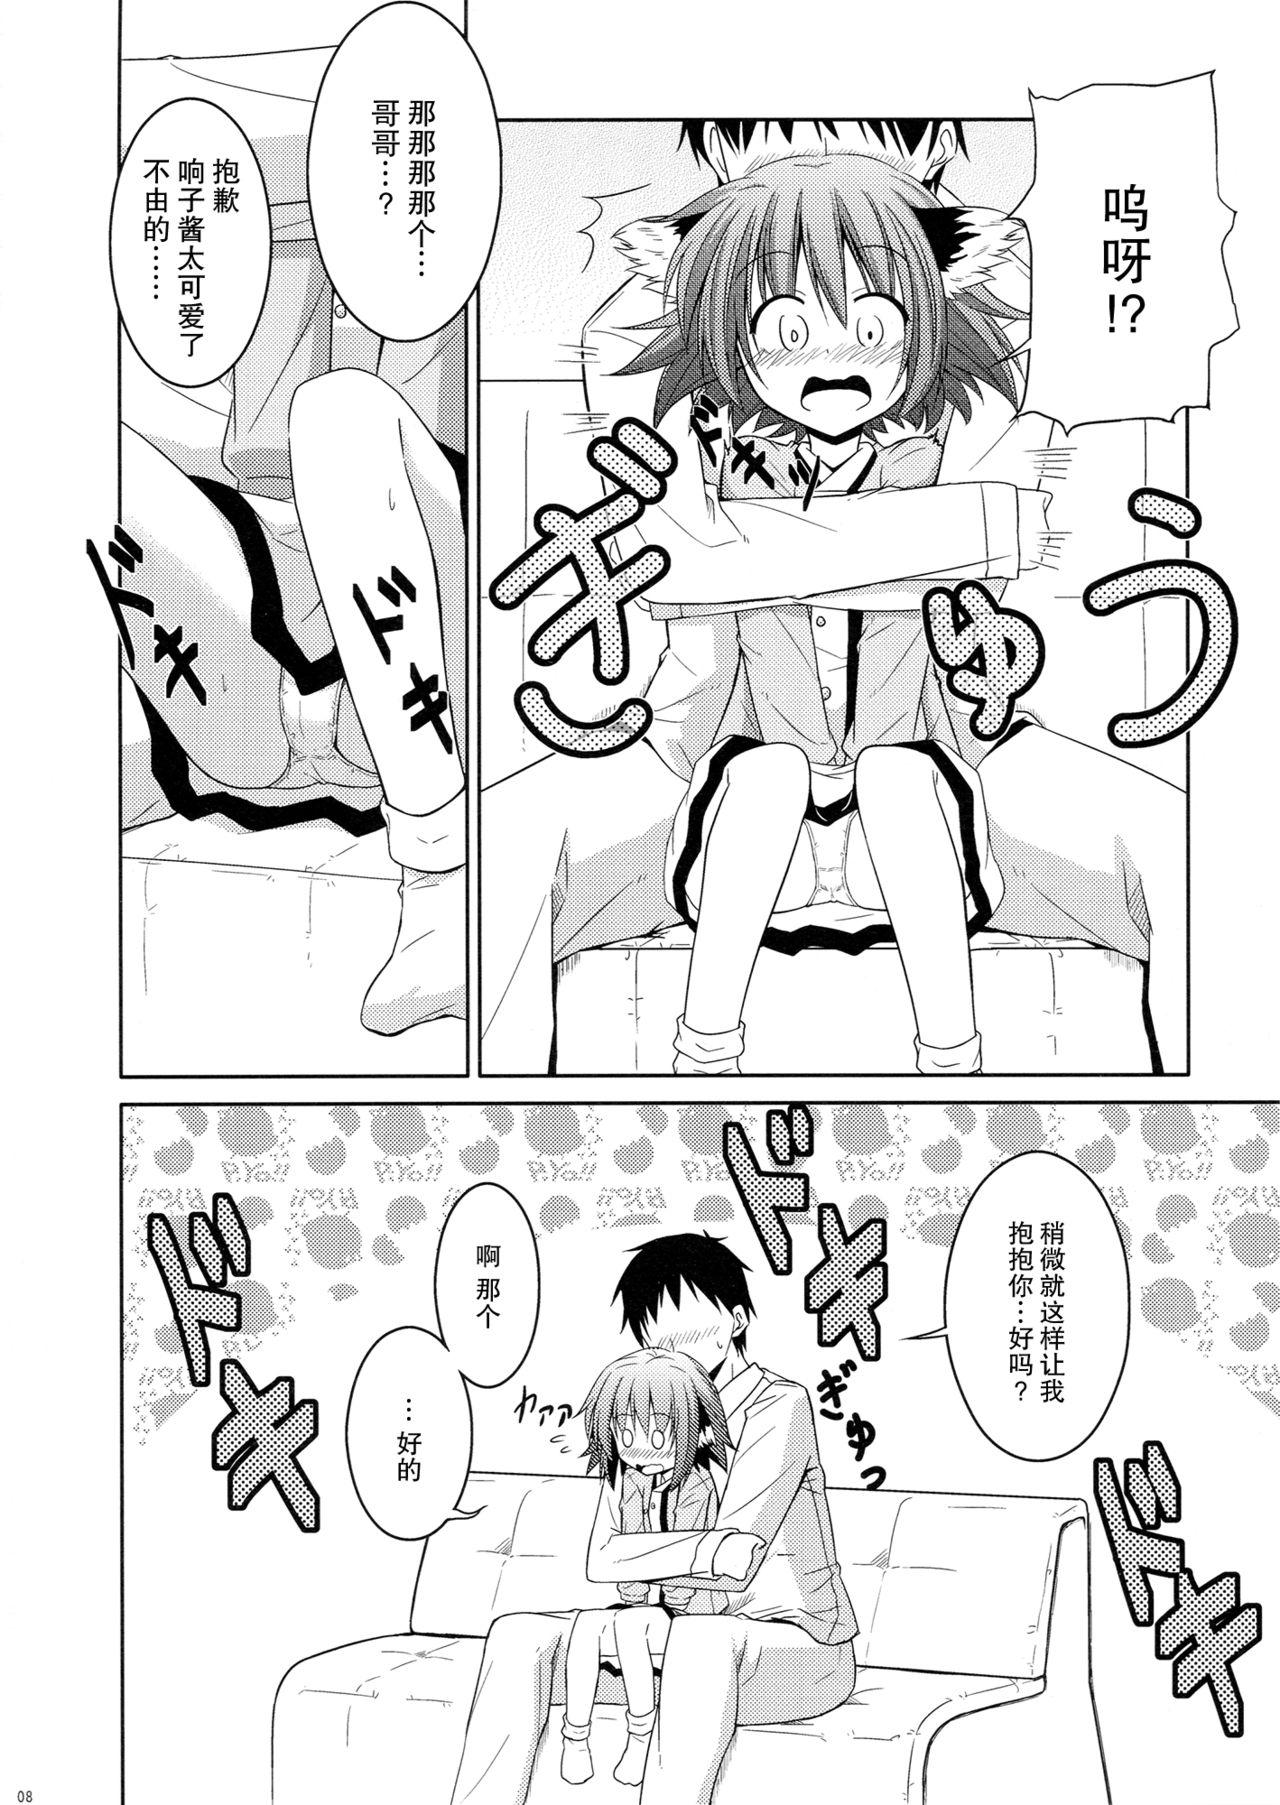 Stretching Kyouko no hibi - Touhou project Gay Orgy - Page 8